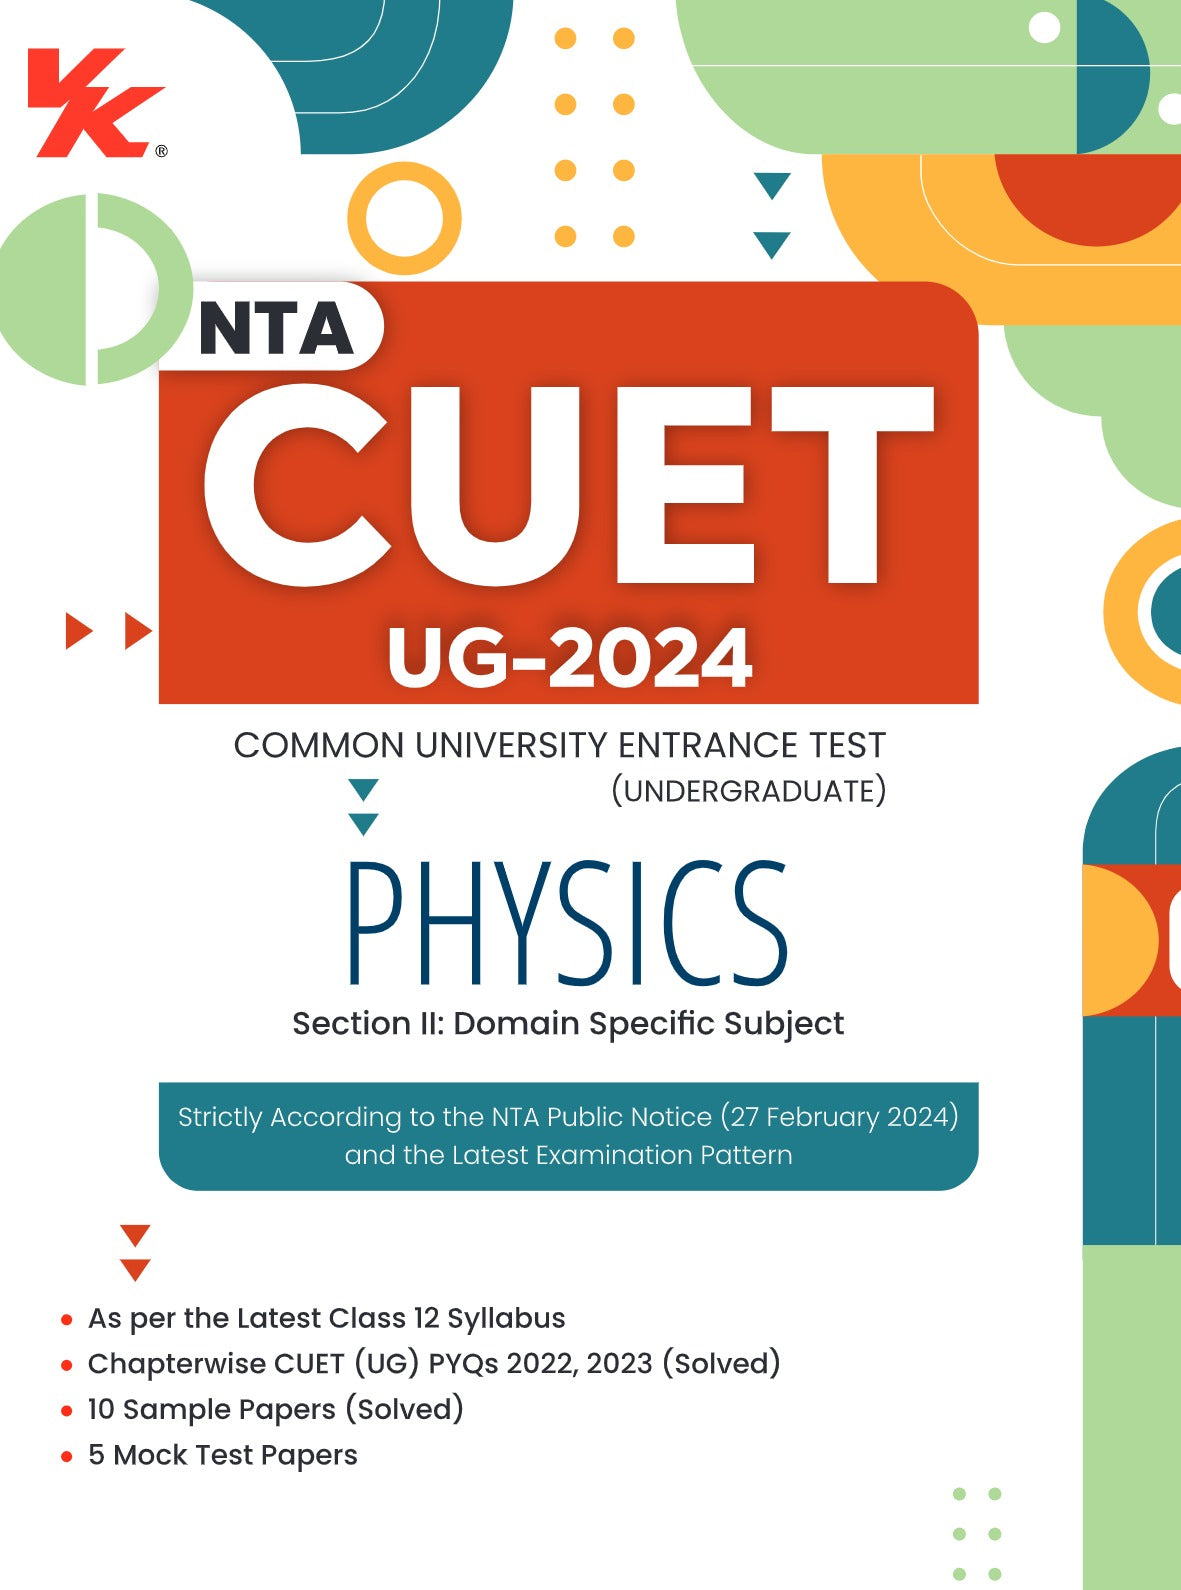 NTA CUET (UG) Physics Book | 10 Sample Papers (Solved) | 5 Mock Test Papers | Common University Entrance Test Section II | Including Solved Previous Year Question Papers (2022, 2023 ) | For Entrance Exam Preparation Book 2024